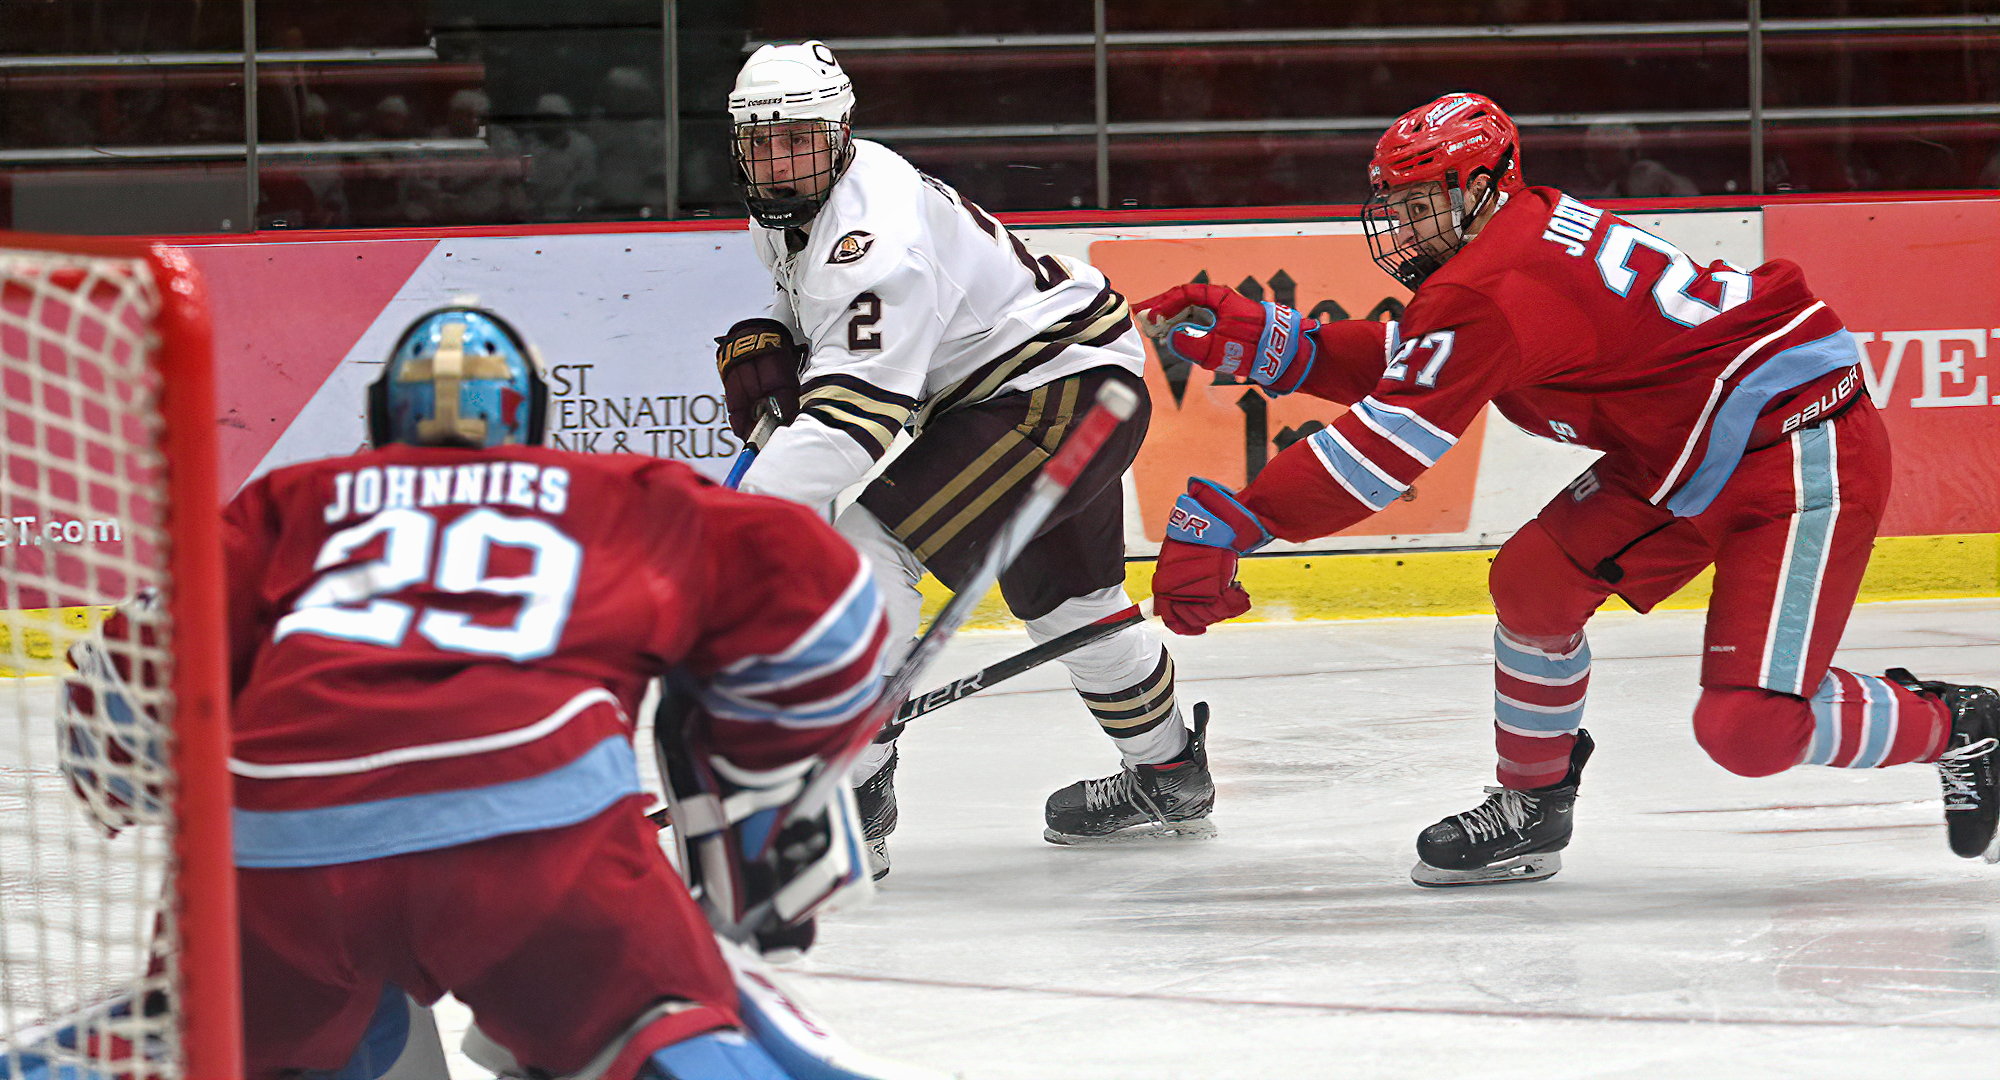 Adam Brown scored his first collegiate goal in the the Cobbers' series finale at St. John's.